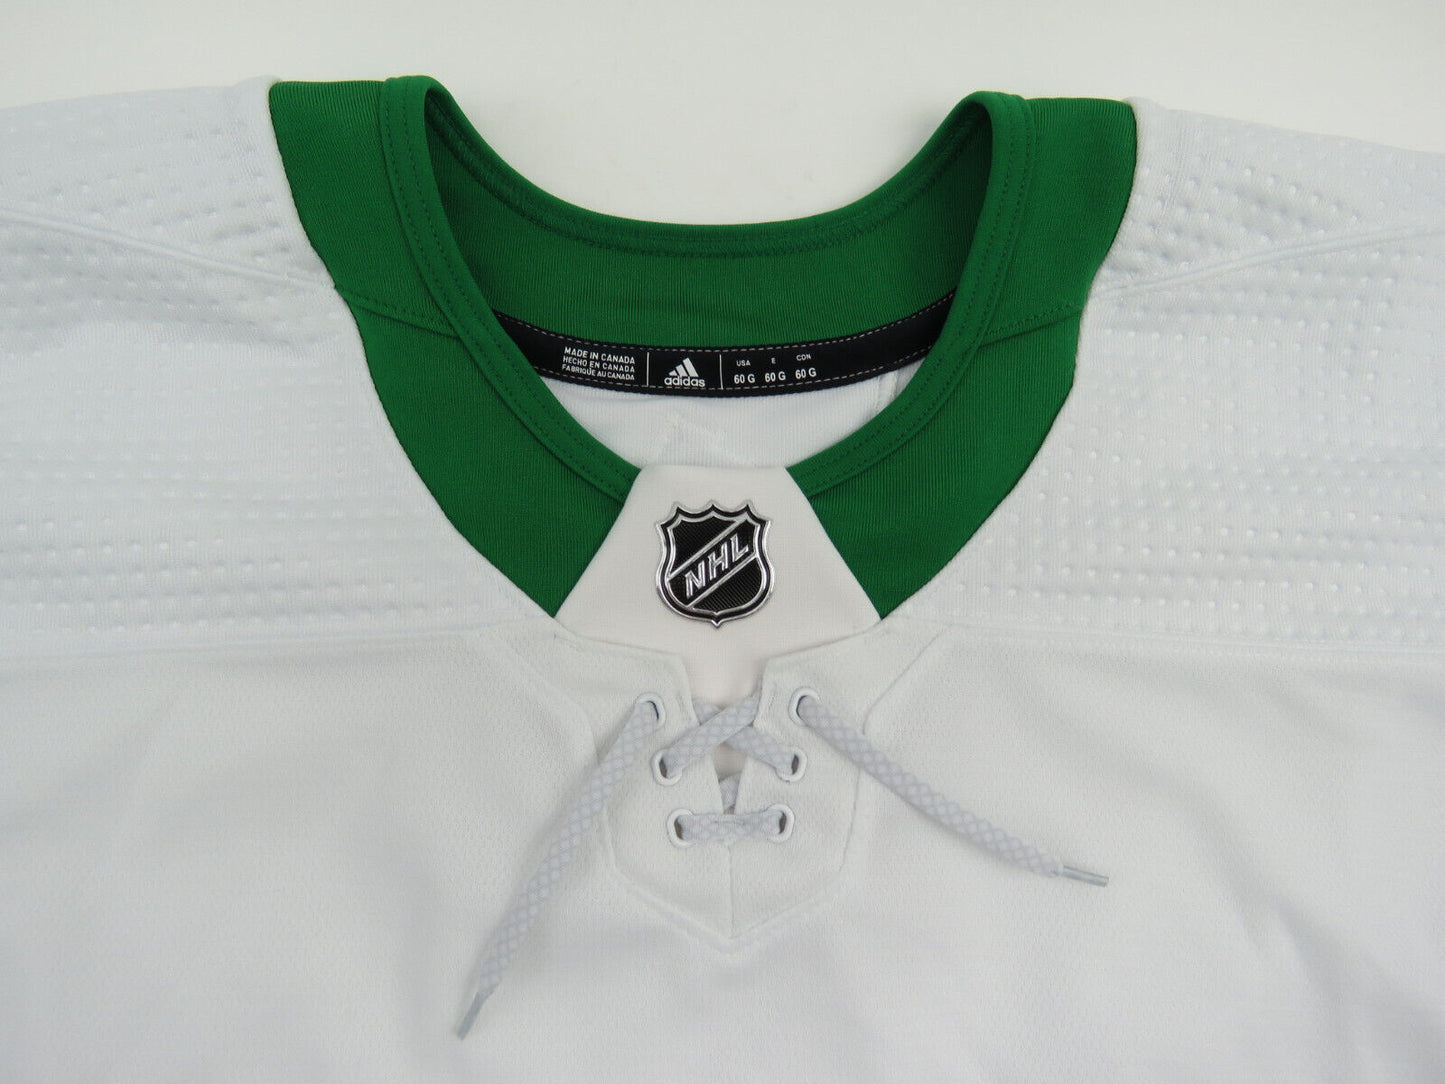 Team Issued Toronto Maple Leafs ST PATS Authentic NHL Hockey Jersey 60 GOALIE